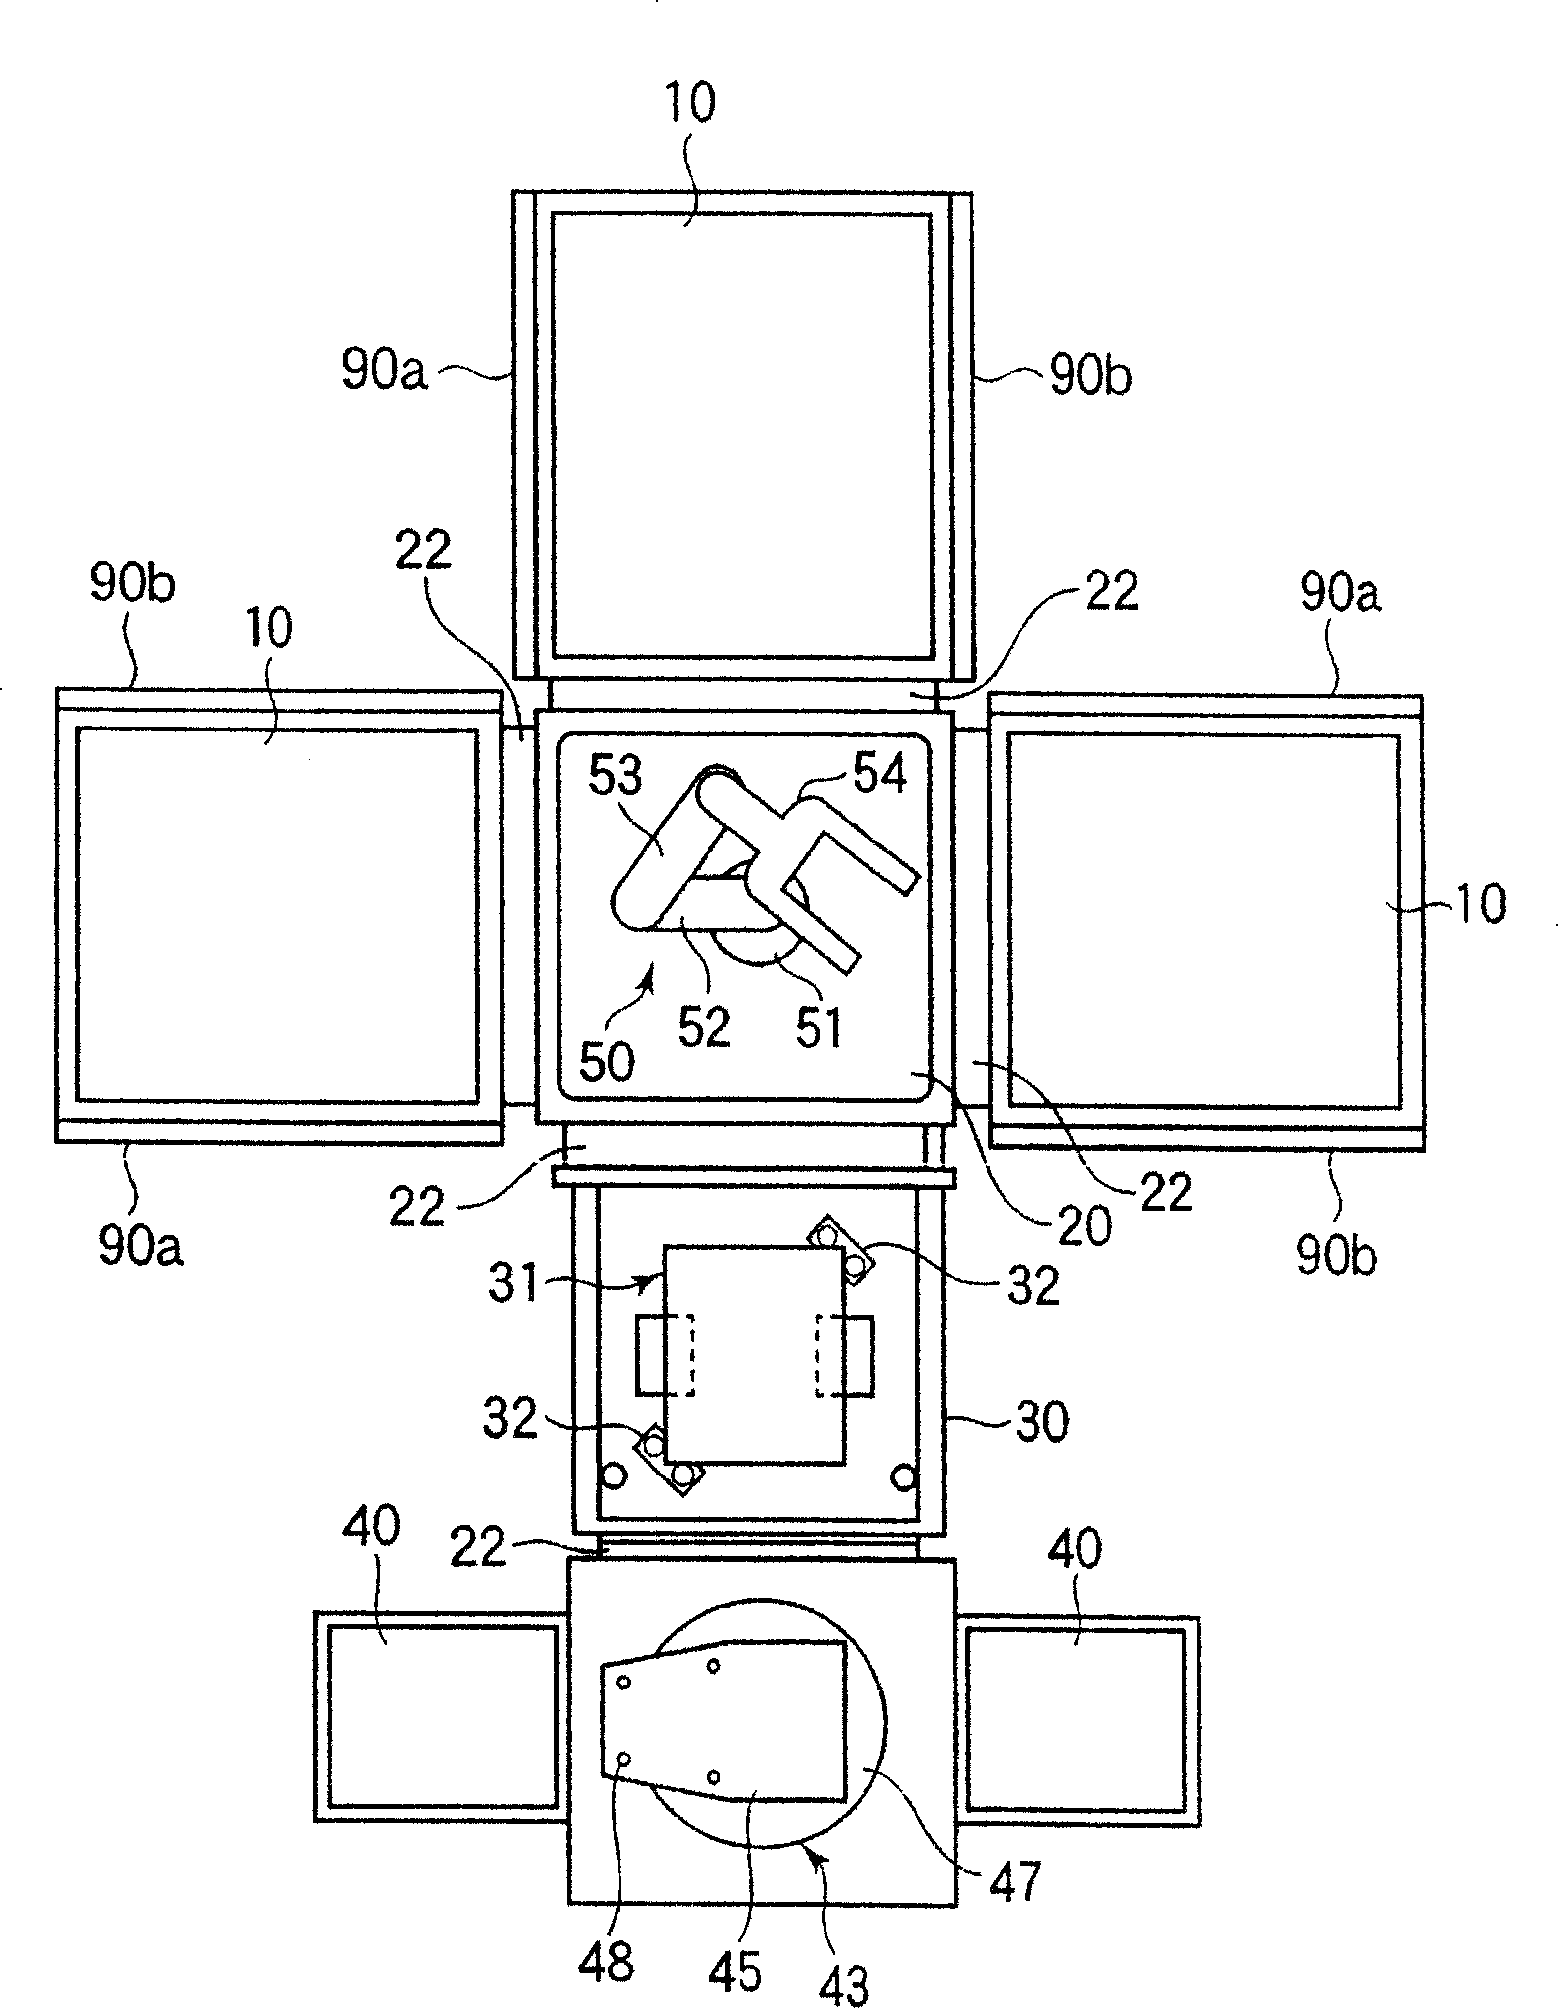 Processing chamber and processing device